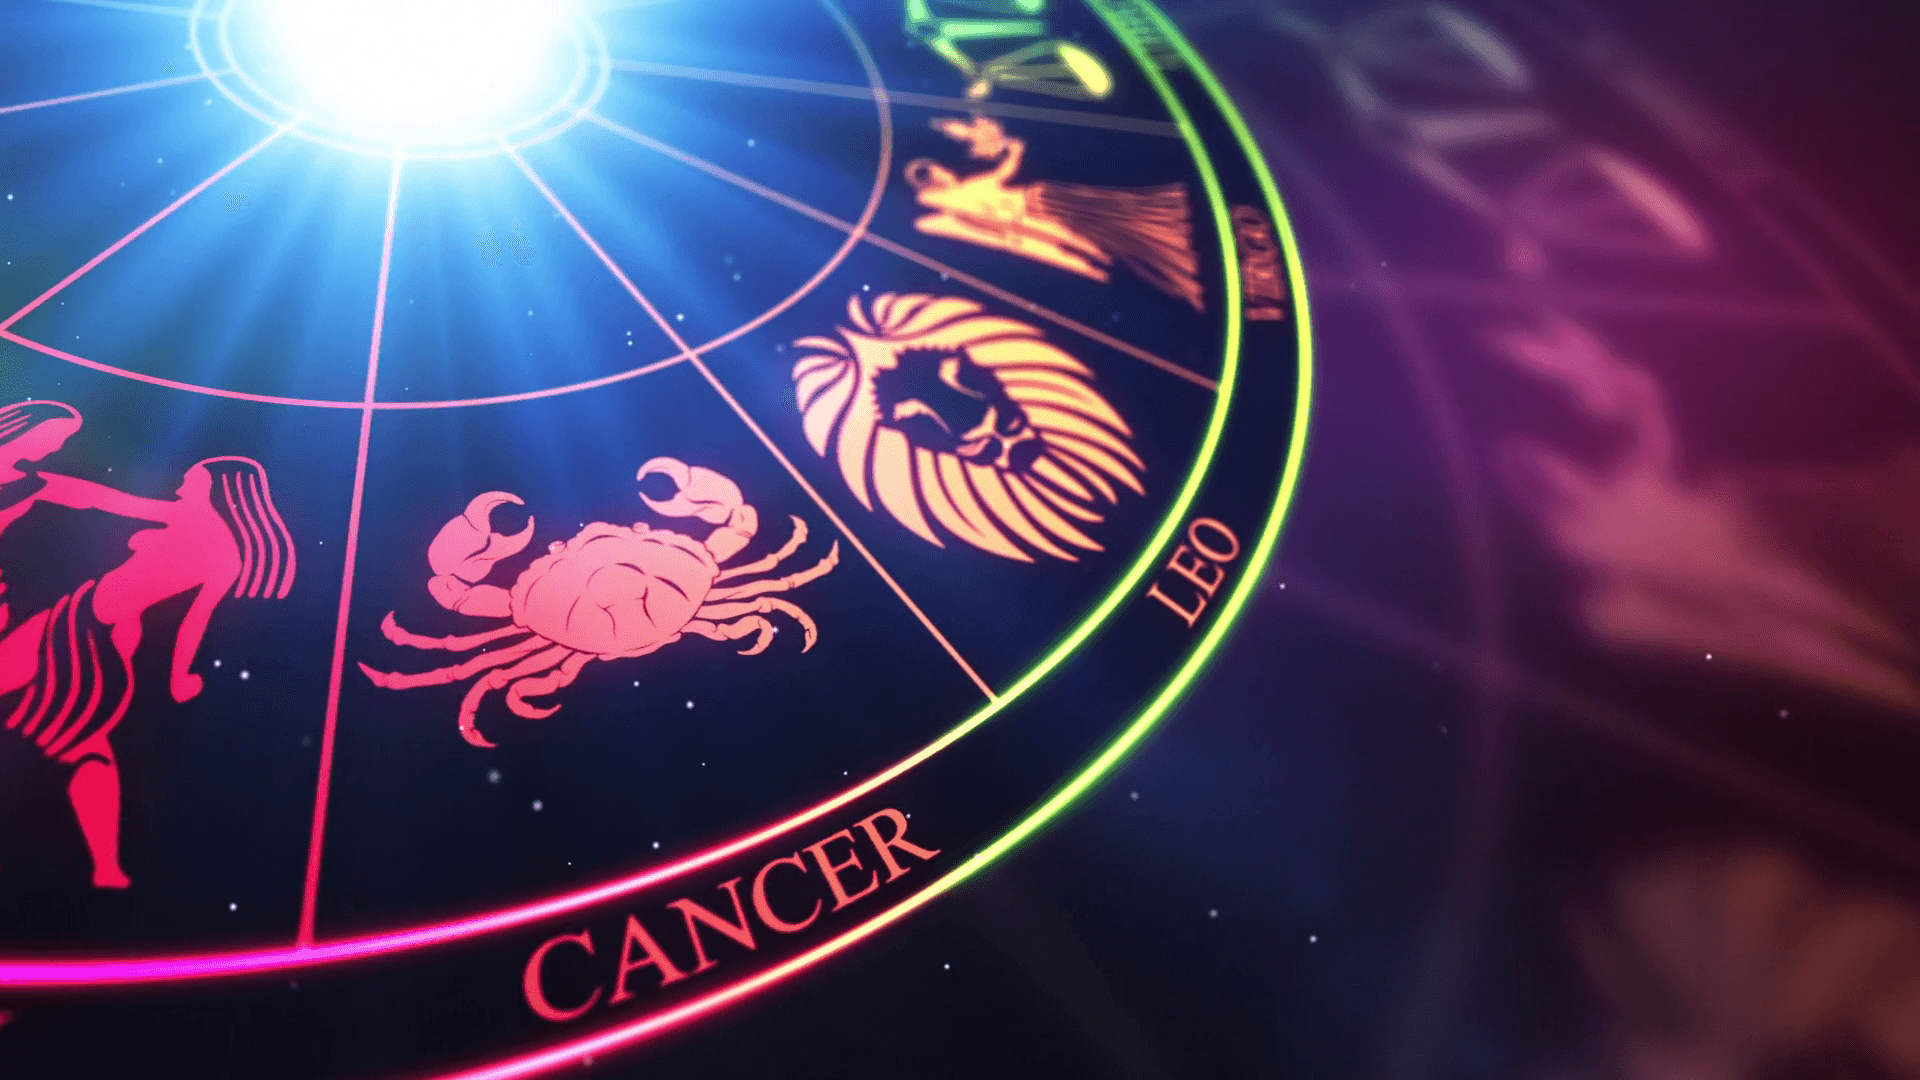 Discover More About Yourself Through Your Unique Sun Sign